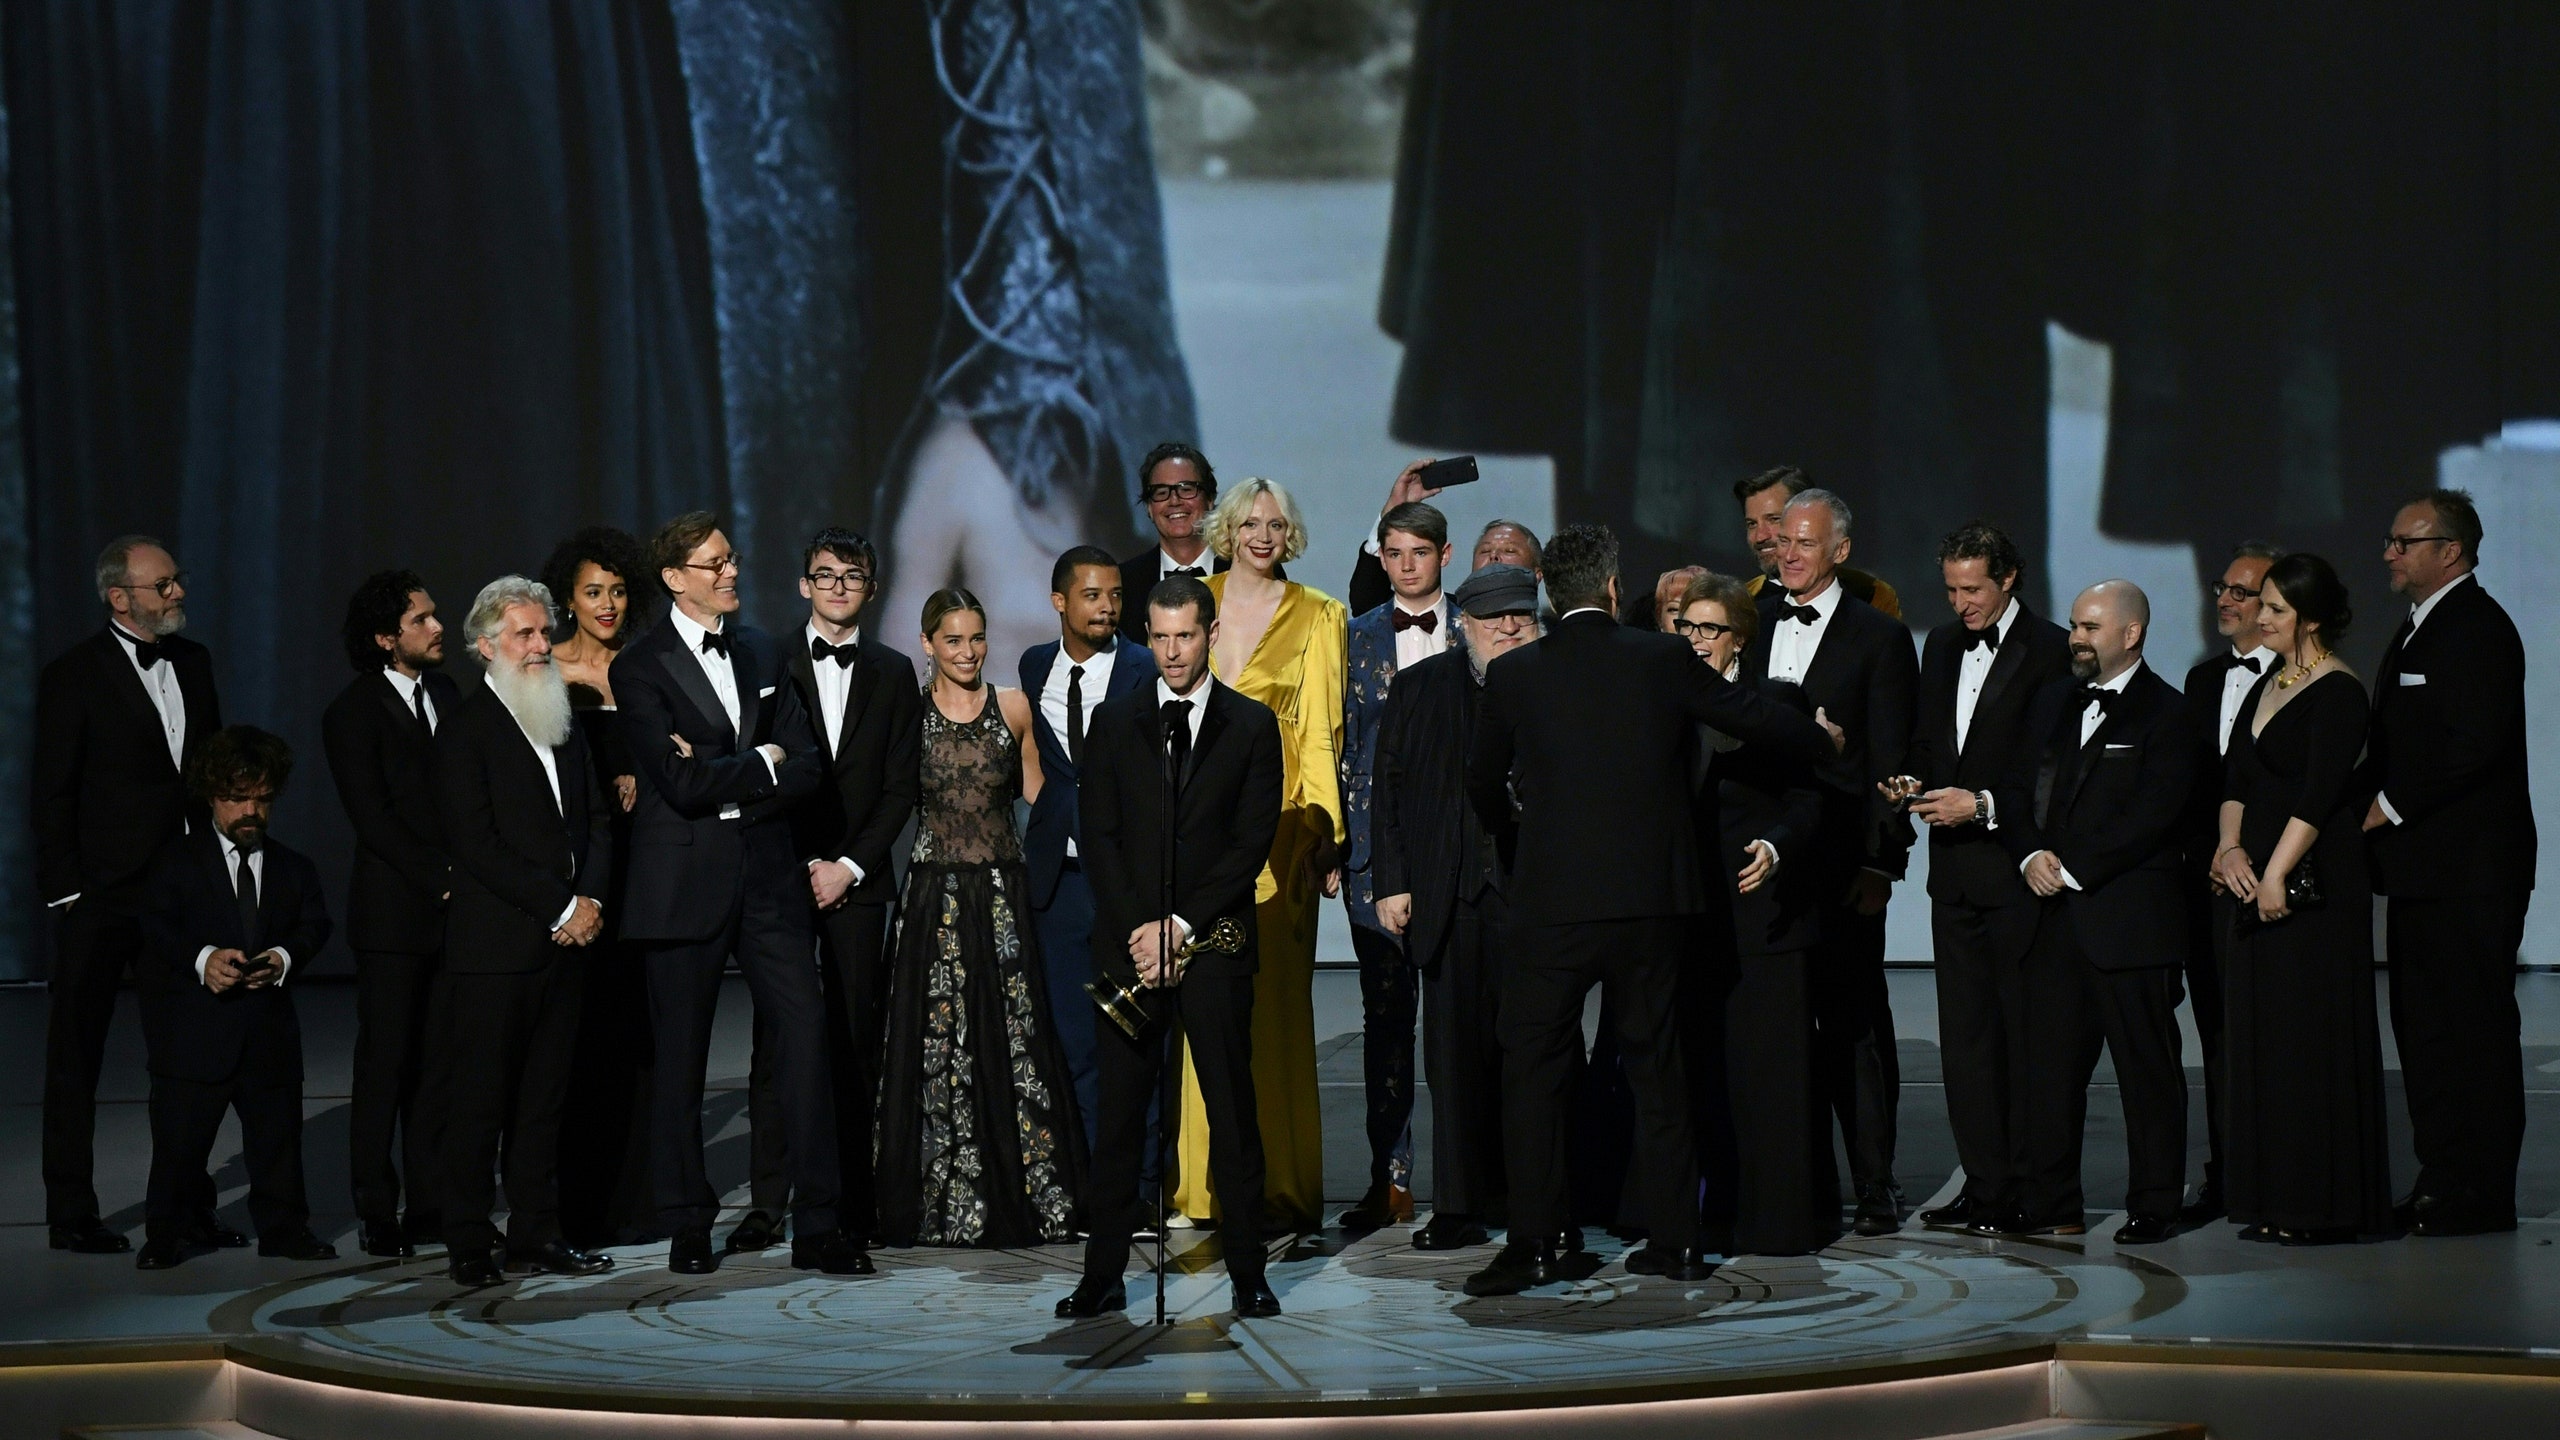 How Do You Solve A Problem Like the Emmys?